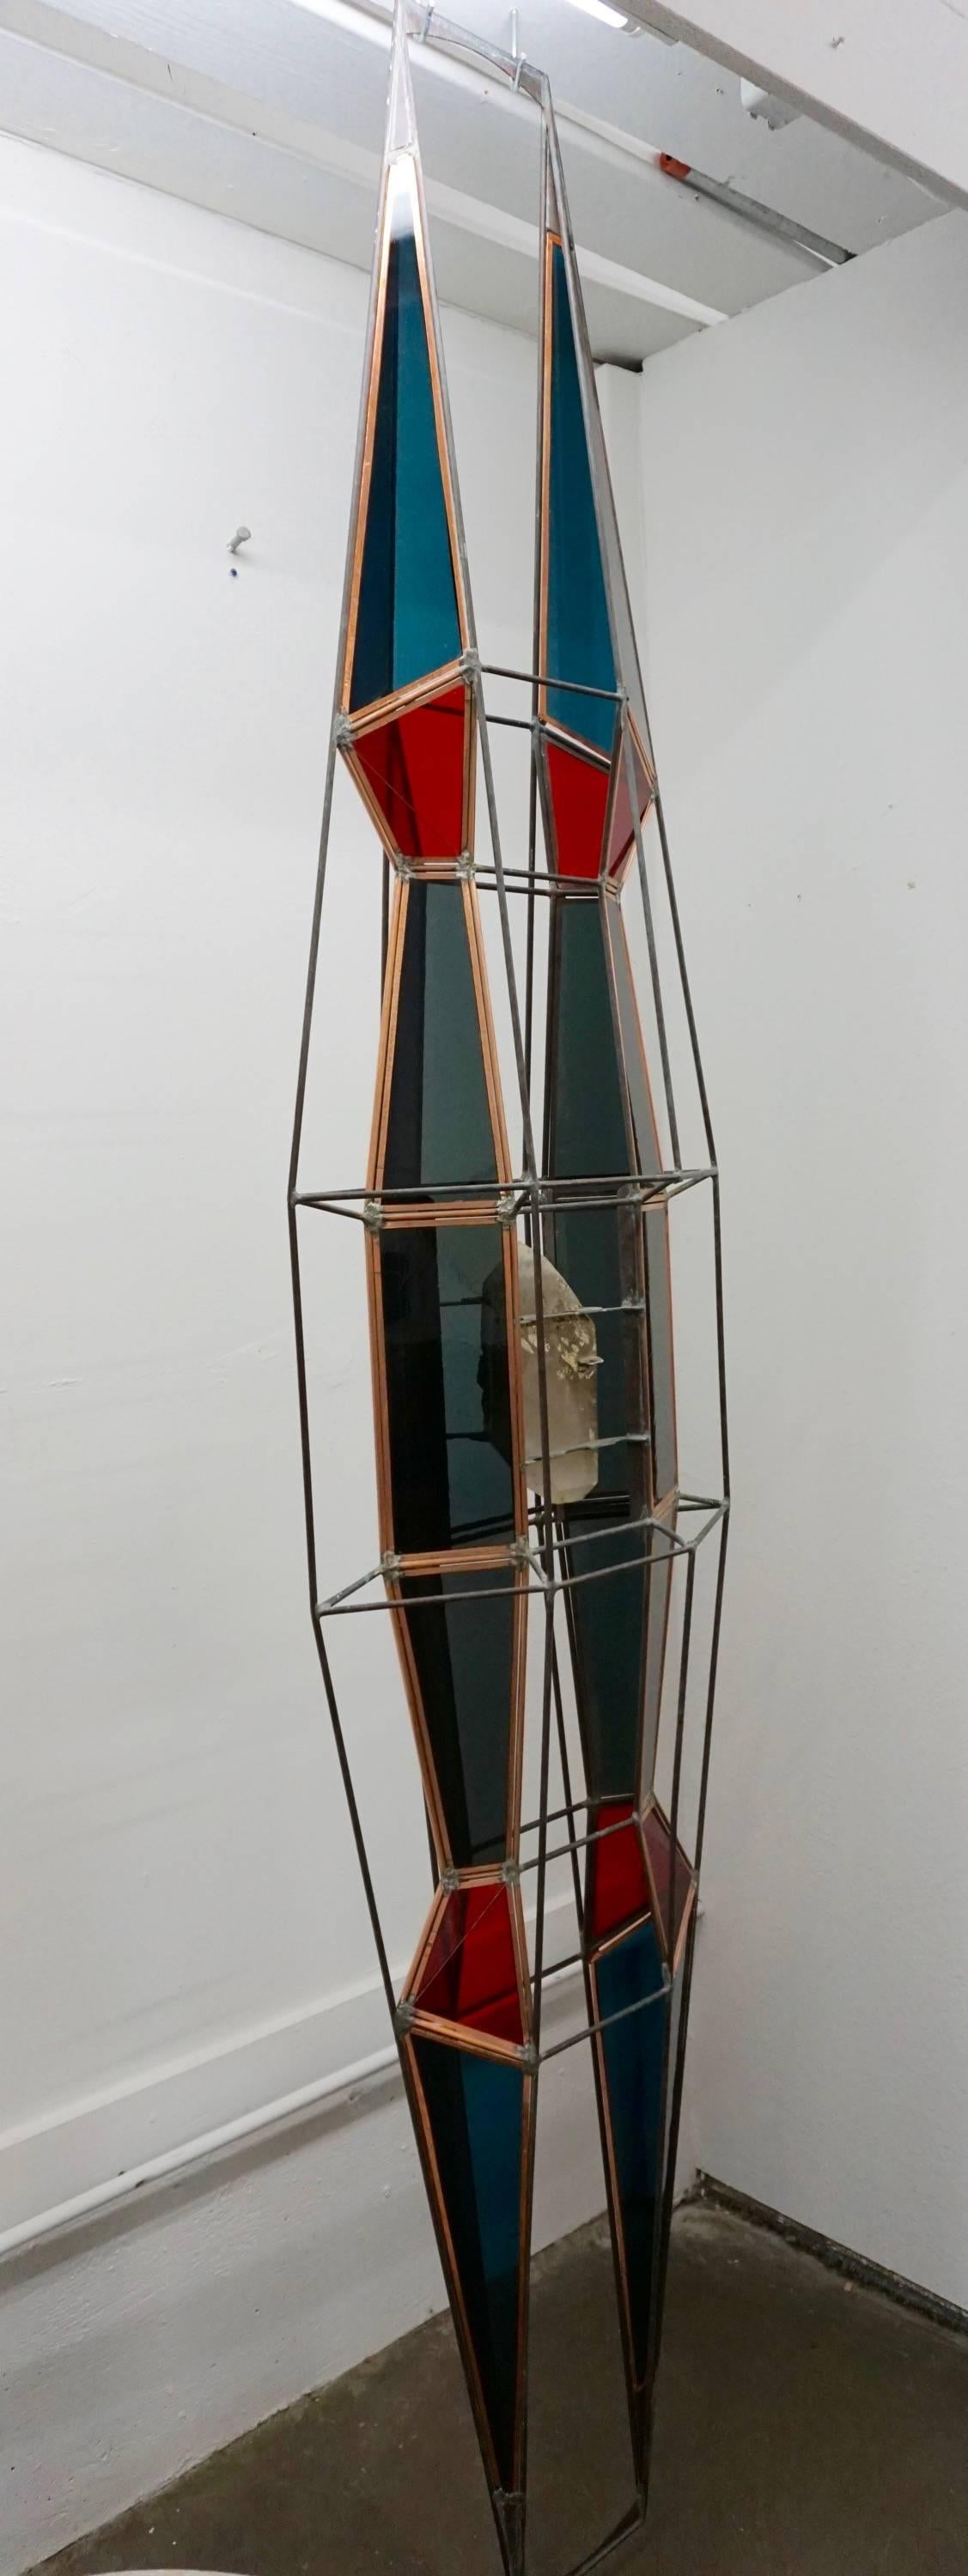 Handcrafted from steel rods with sections of stained glass in shades of blue and red. A piece of quartz crystal rests in the middle of the sculpture. Can be hung vertically or horizontally.